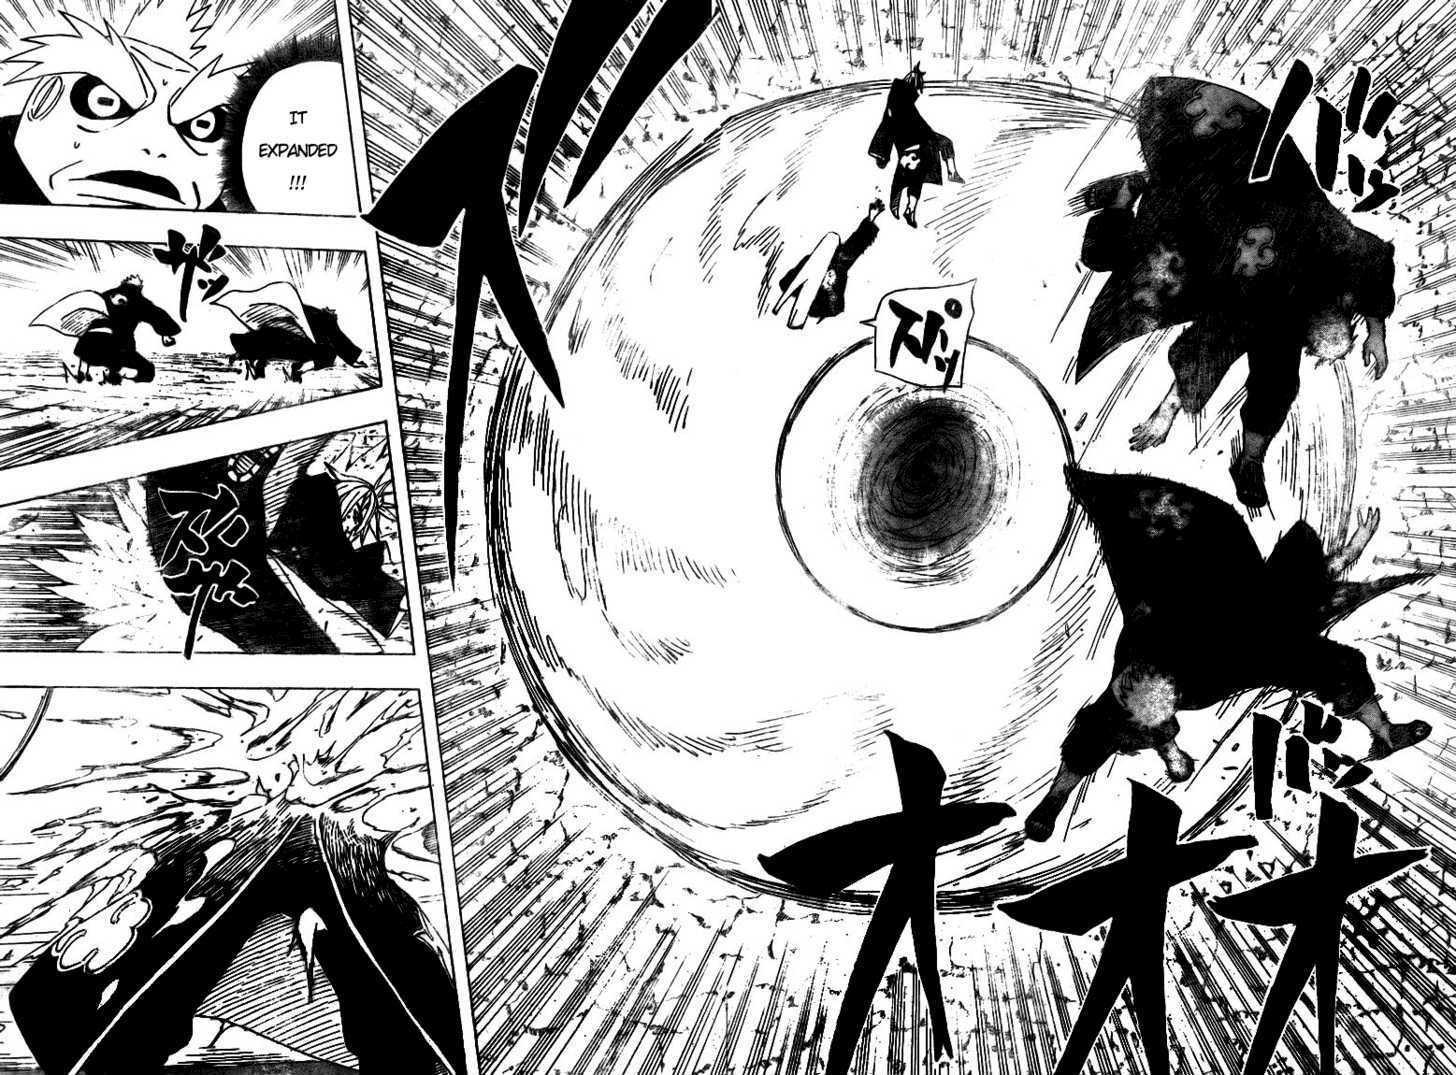 Vol.46 Chapter 432 – The Rasenshuriken Once Again!! | 6 page